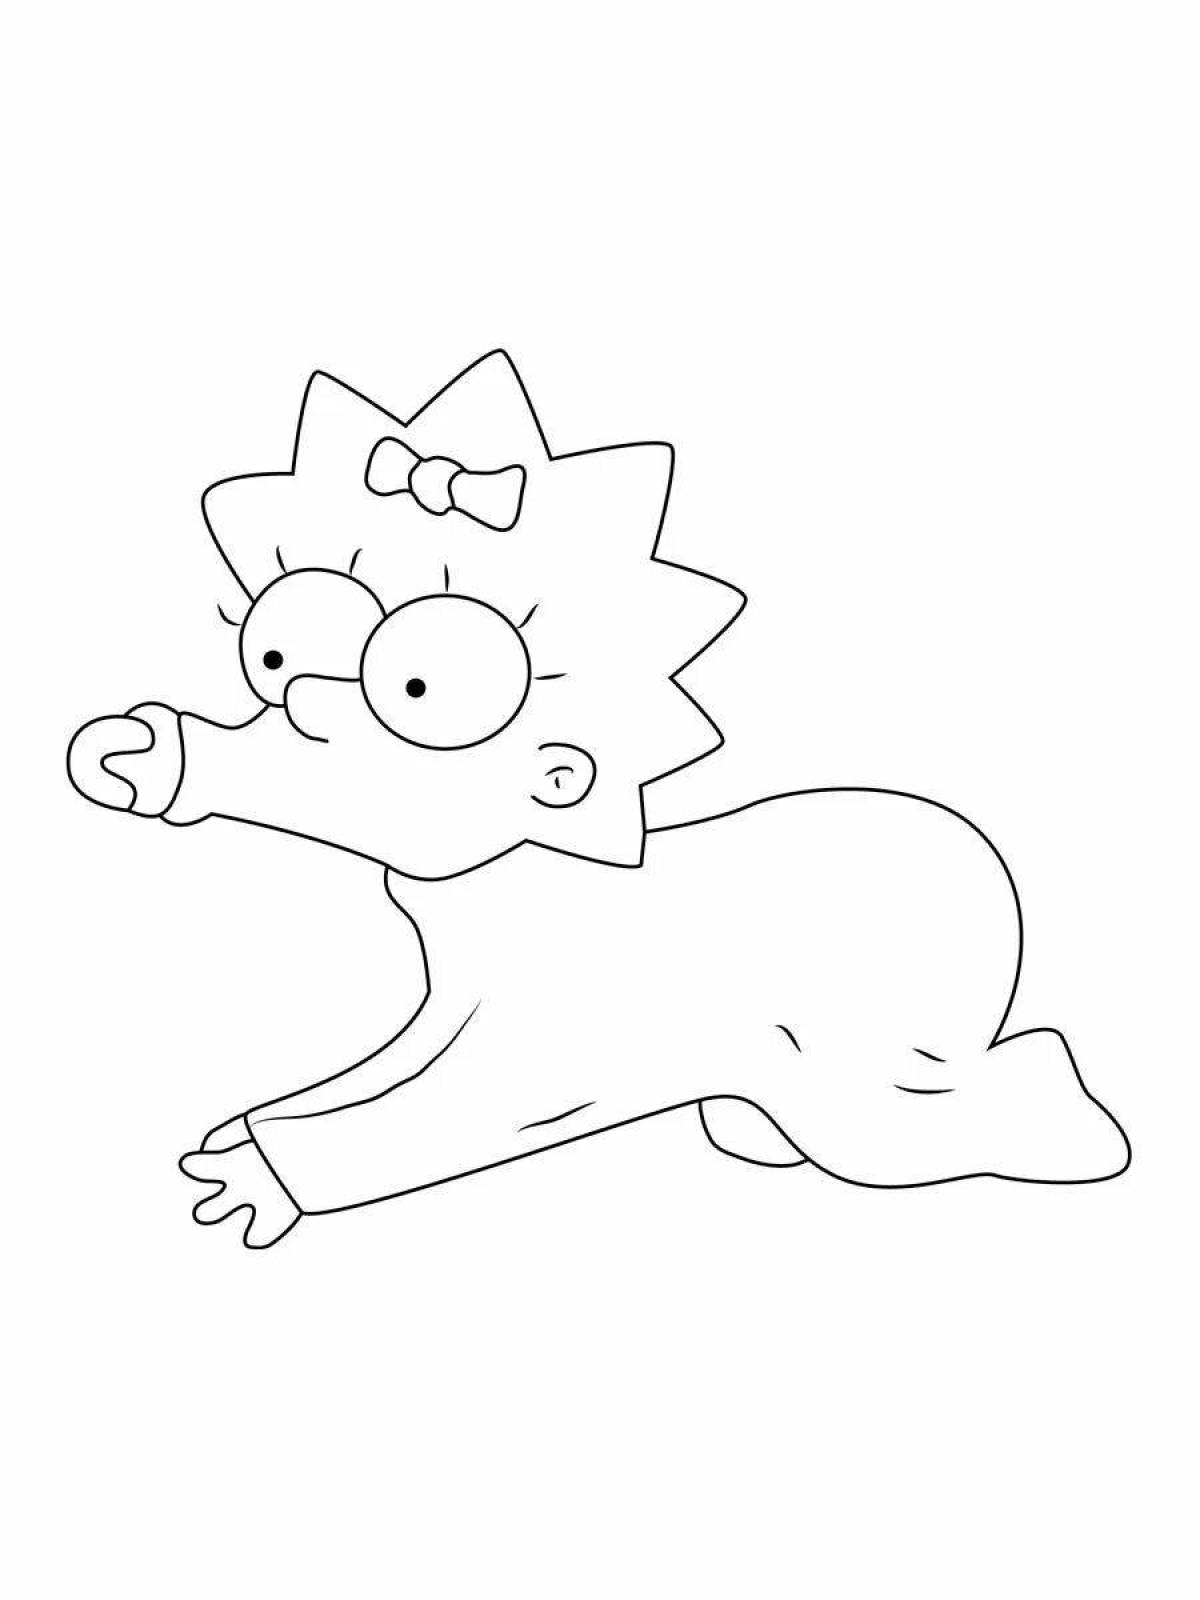 Lisa simpson's vibrant coloring page